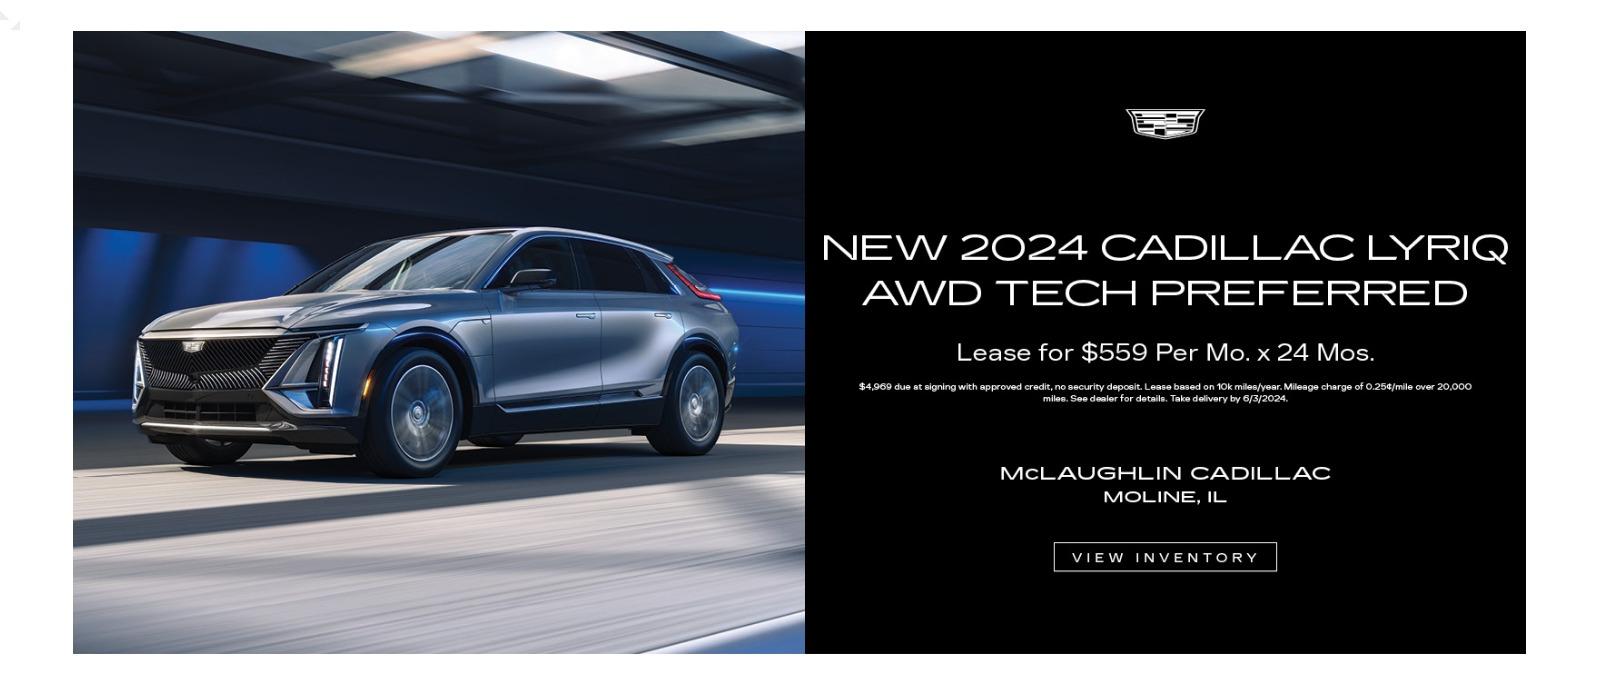 Lease a new 2024 Cadillac Lyriq AWD Tech Preferred for $559 per month for 24 months